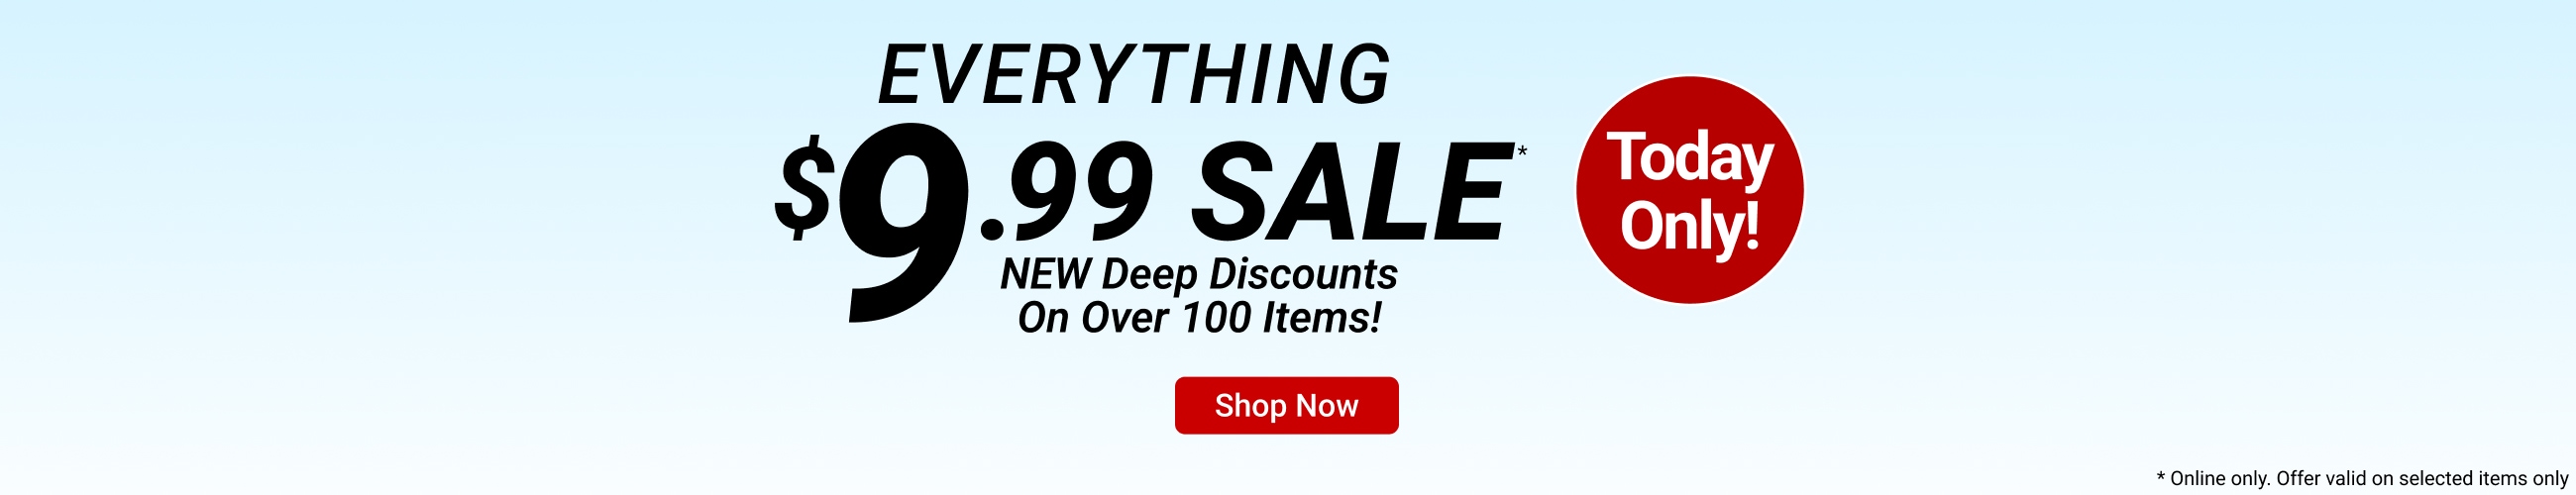 Shop deep discounts on over 100 items - everything at $9.99